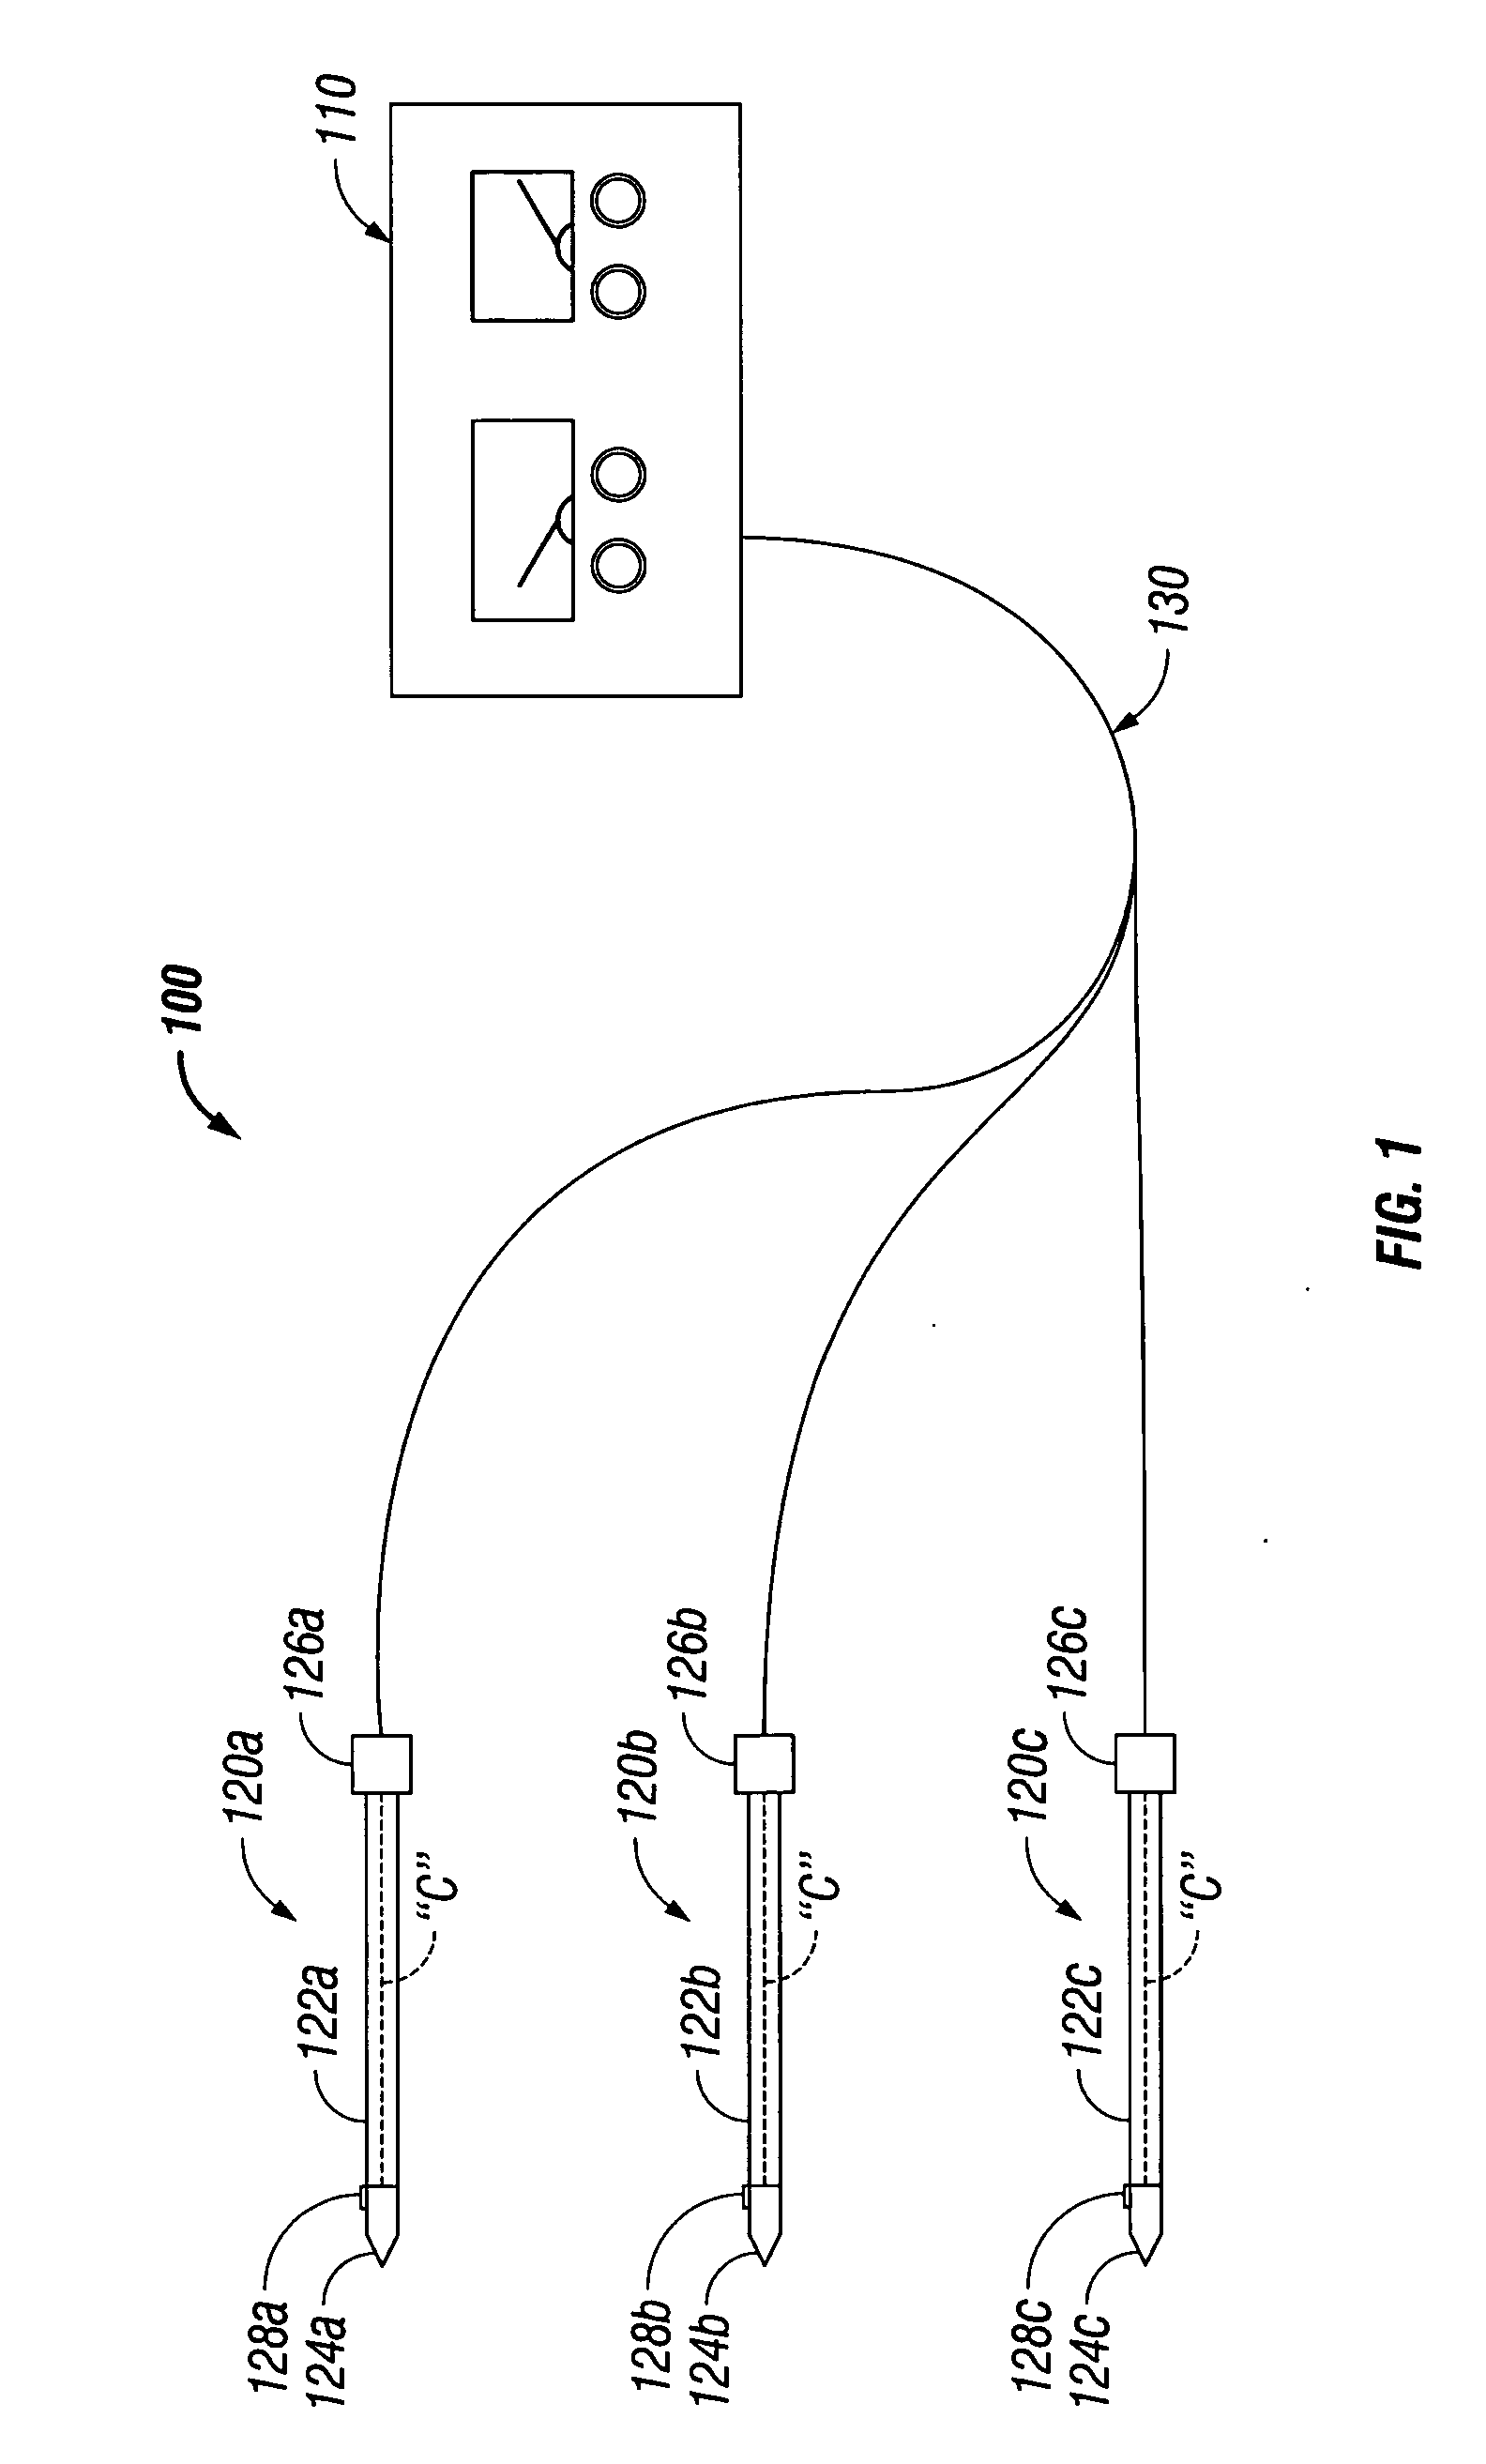 Method for energy-based stimulation of acupuncture meridians